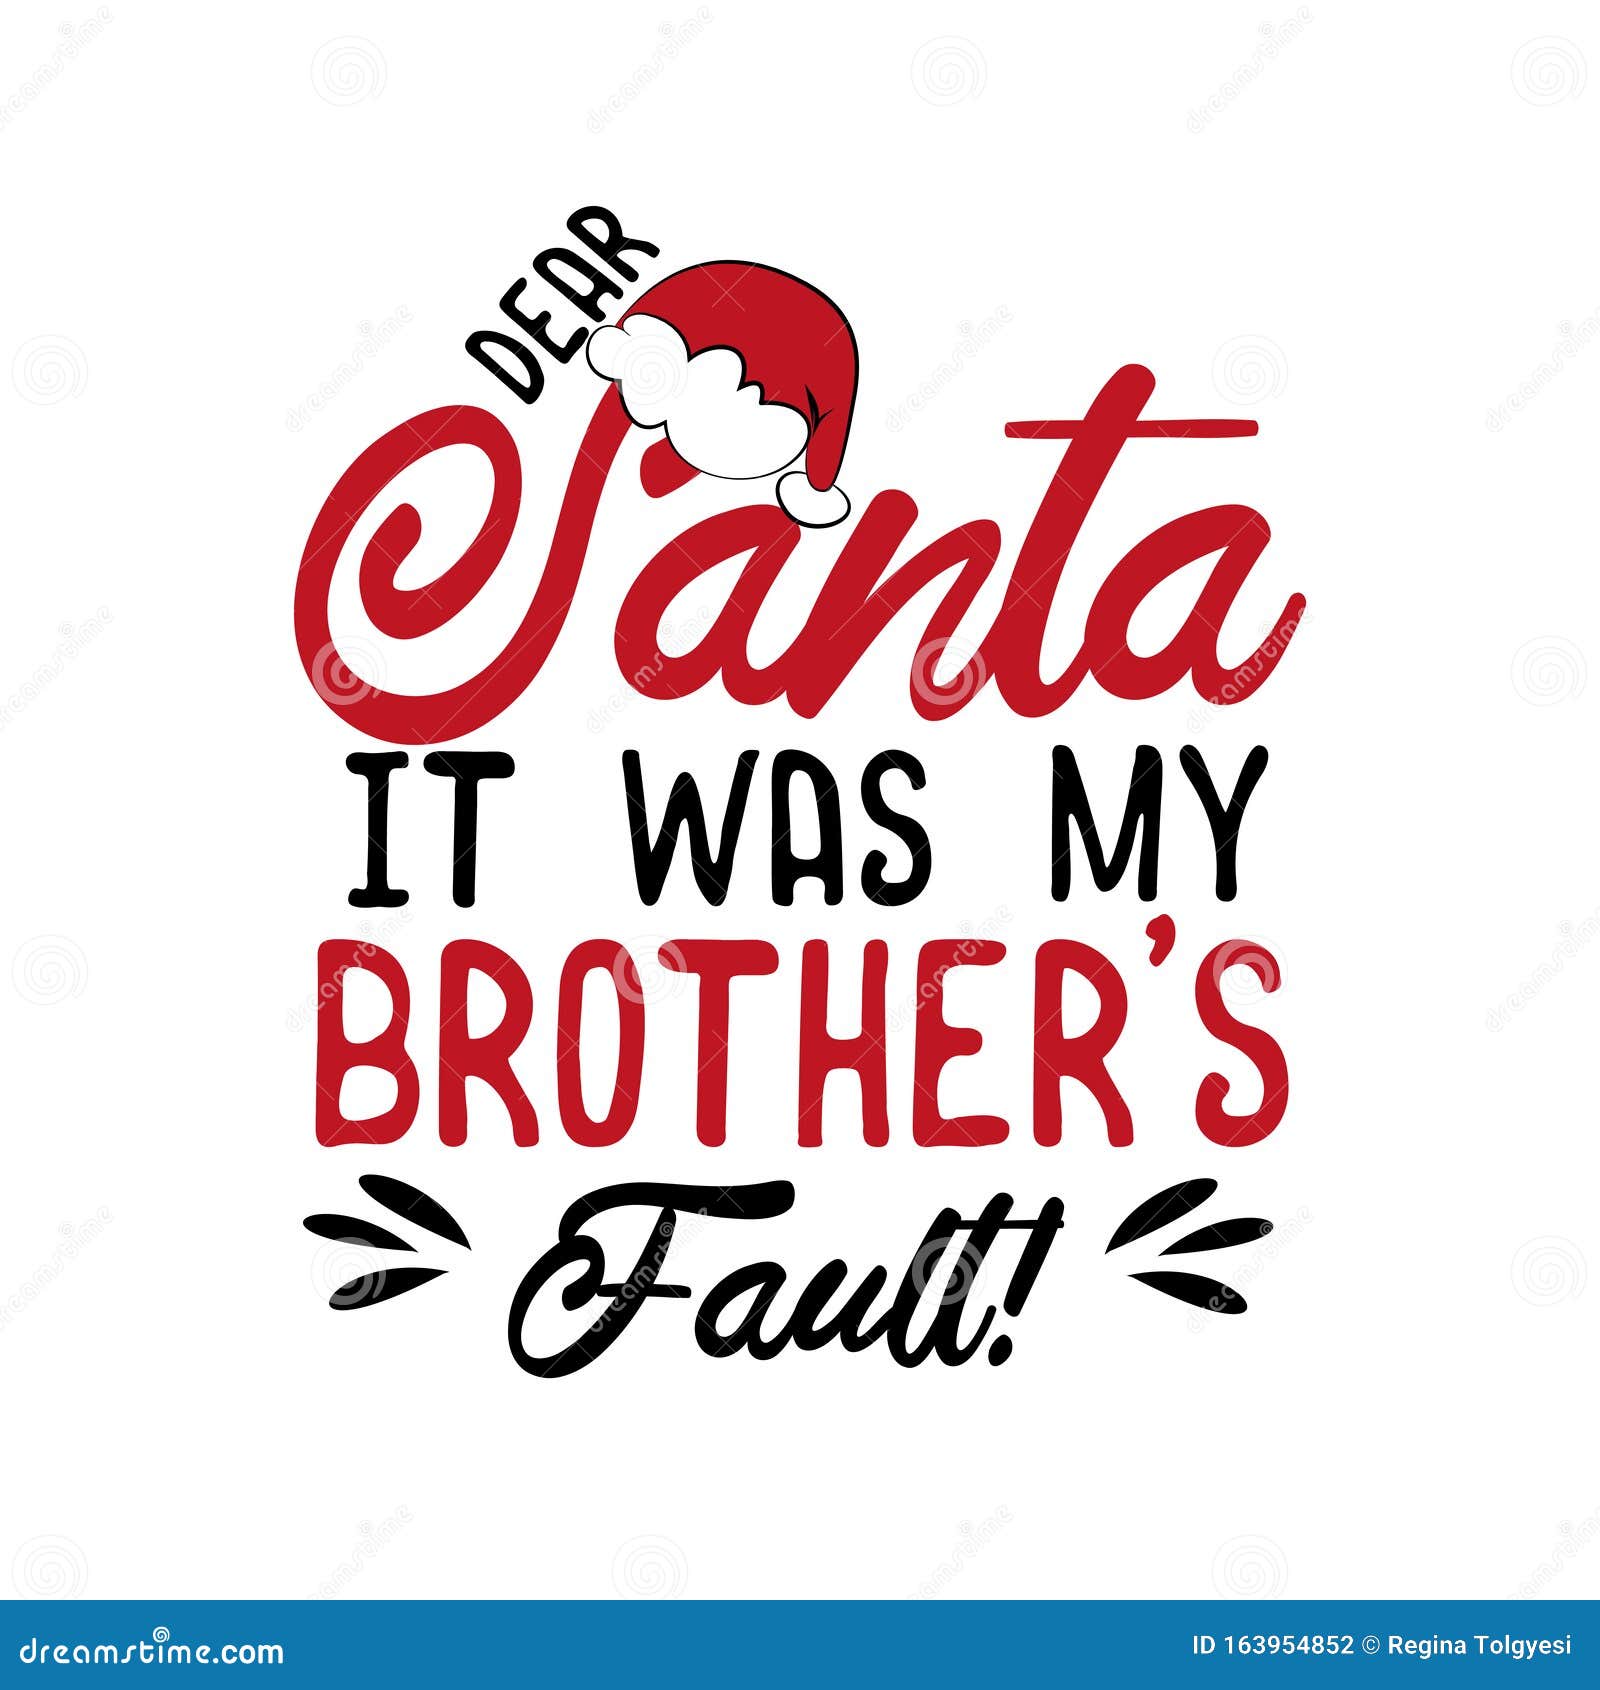 dear santa it was my brother`s fault!- funny christmas text, with santa`s cap.